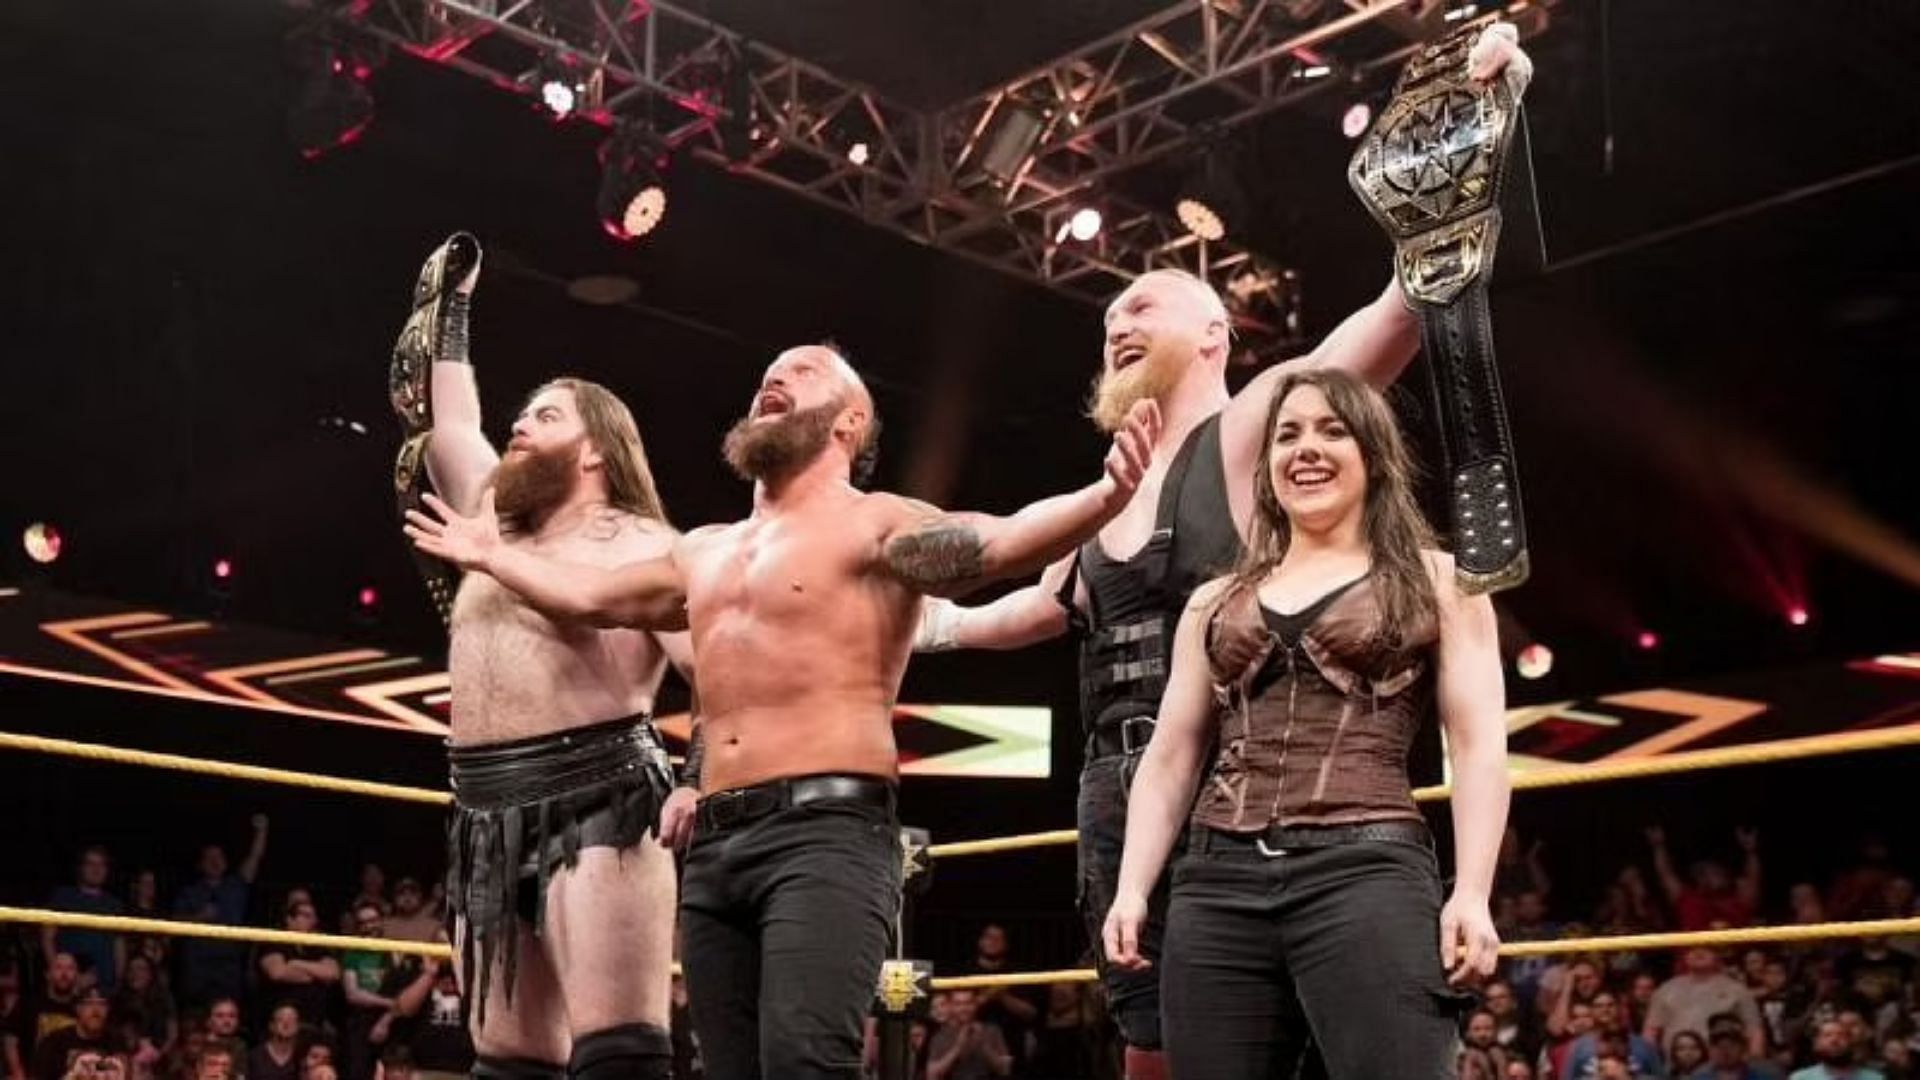 Sanity was a promising stable that made an impact albeit for a short while in NXT